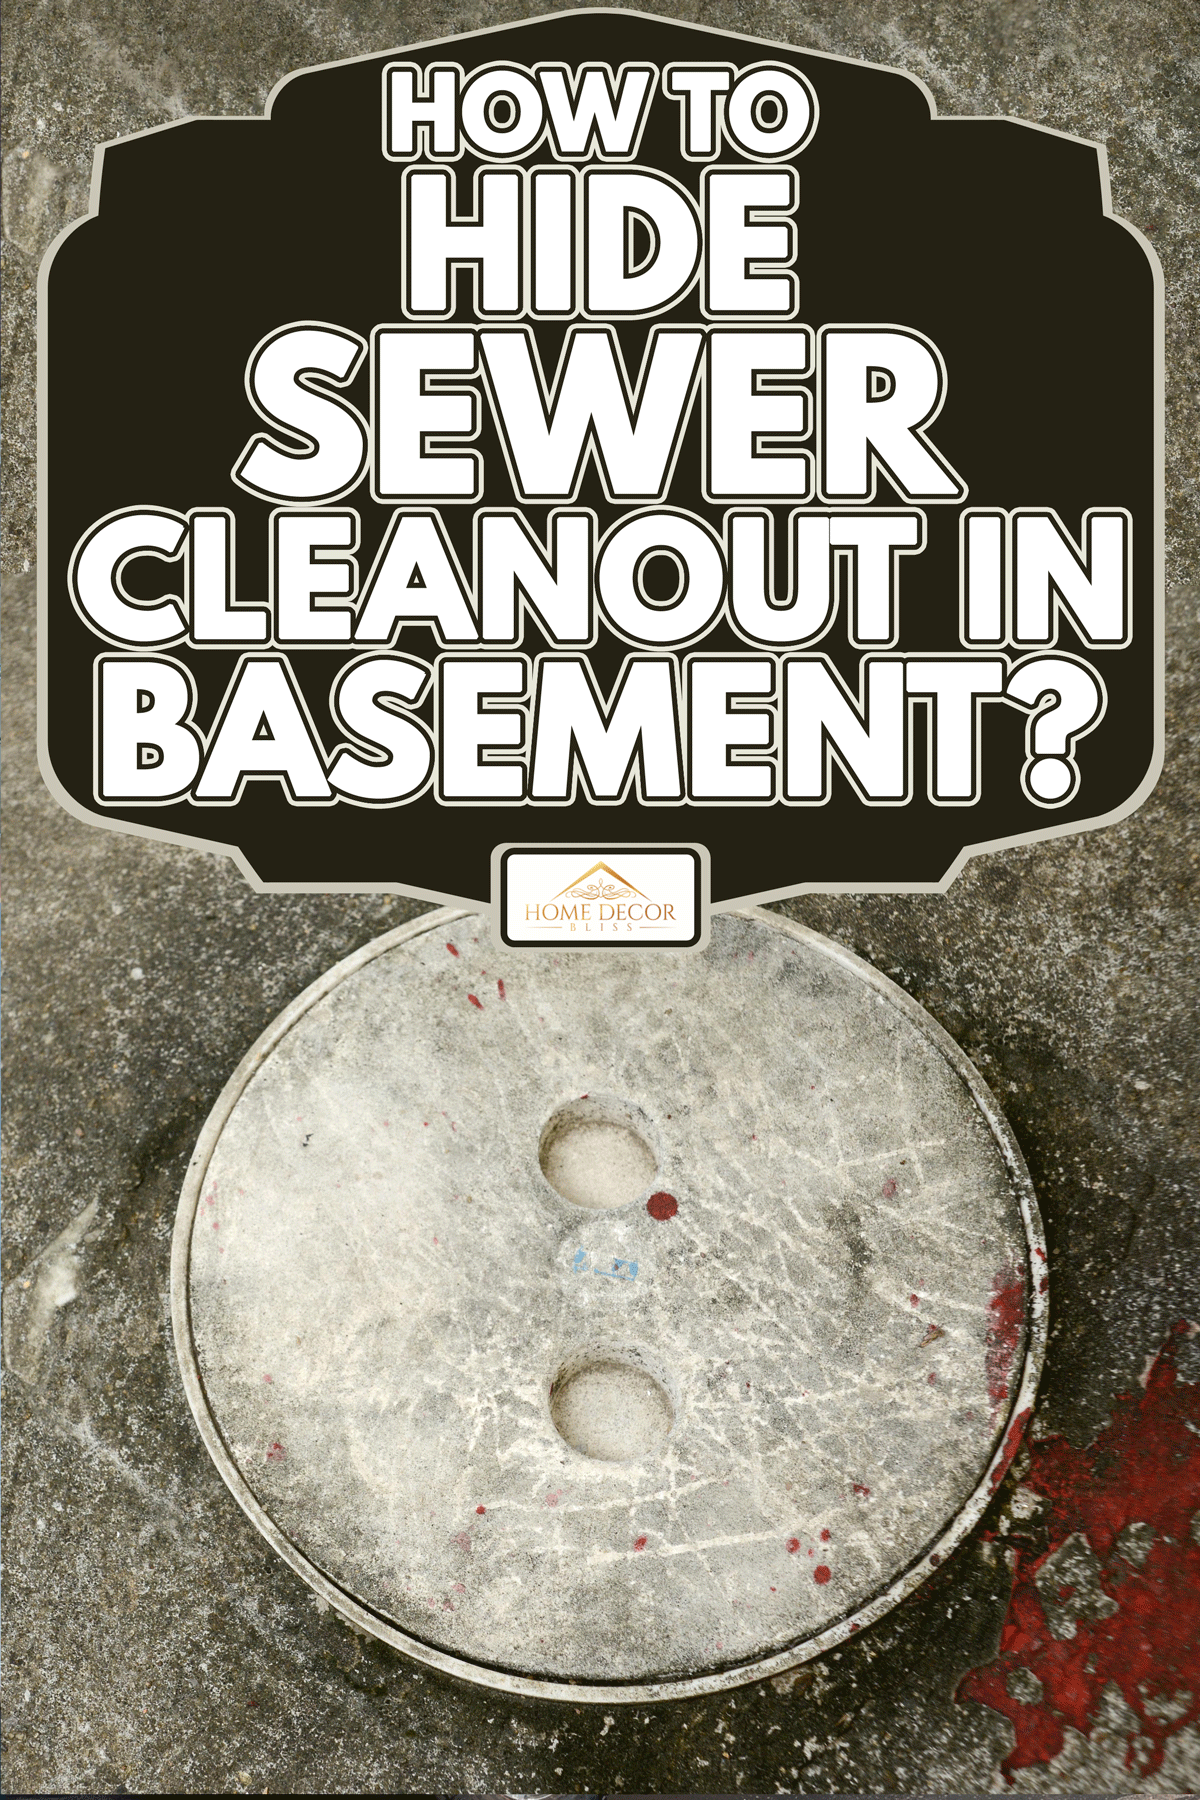 Floor cleanout on cement floor, How To Hide Sewer Cleanout In Basement?